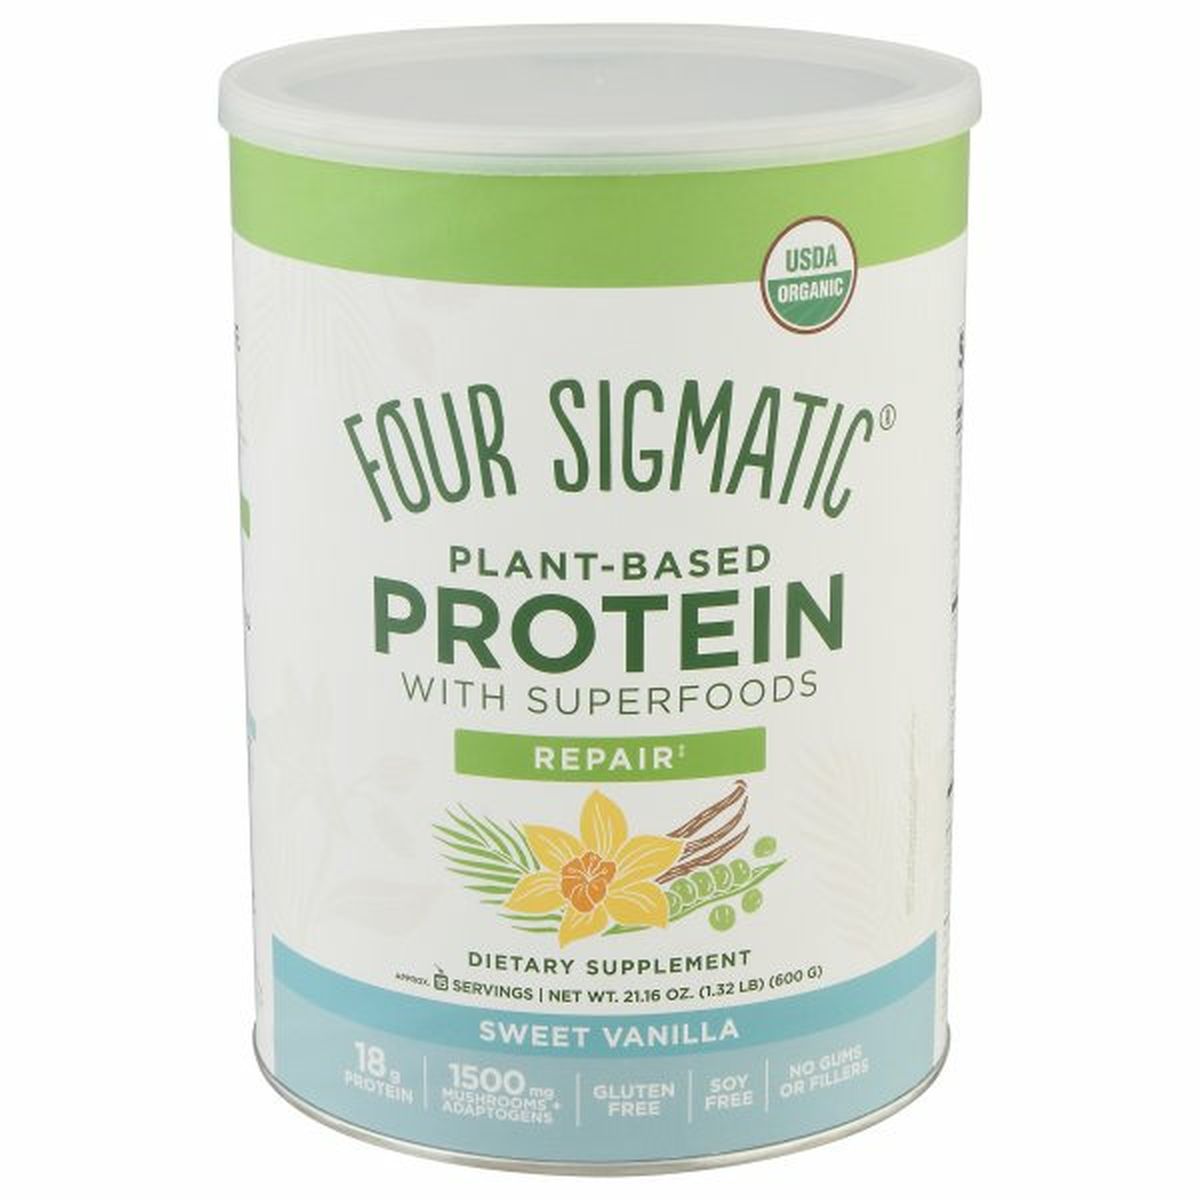 Calories in Four Sigmatic Protein with Superfoods, Plant-Based, Sweet Vanilla